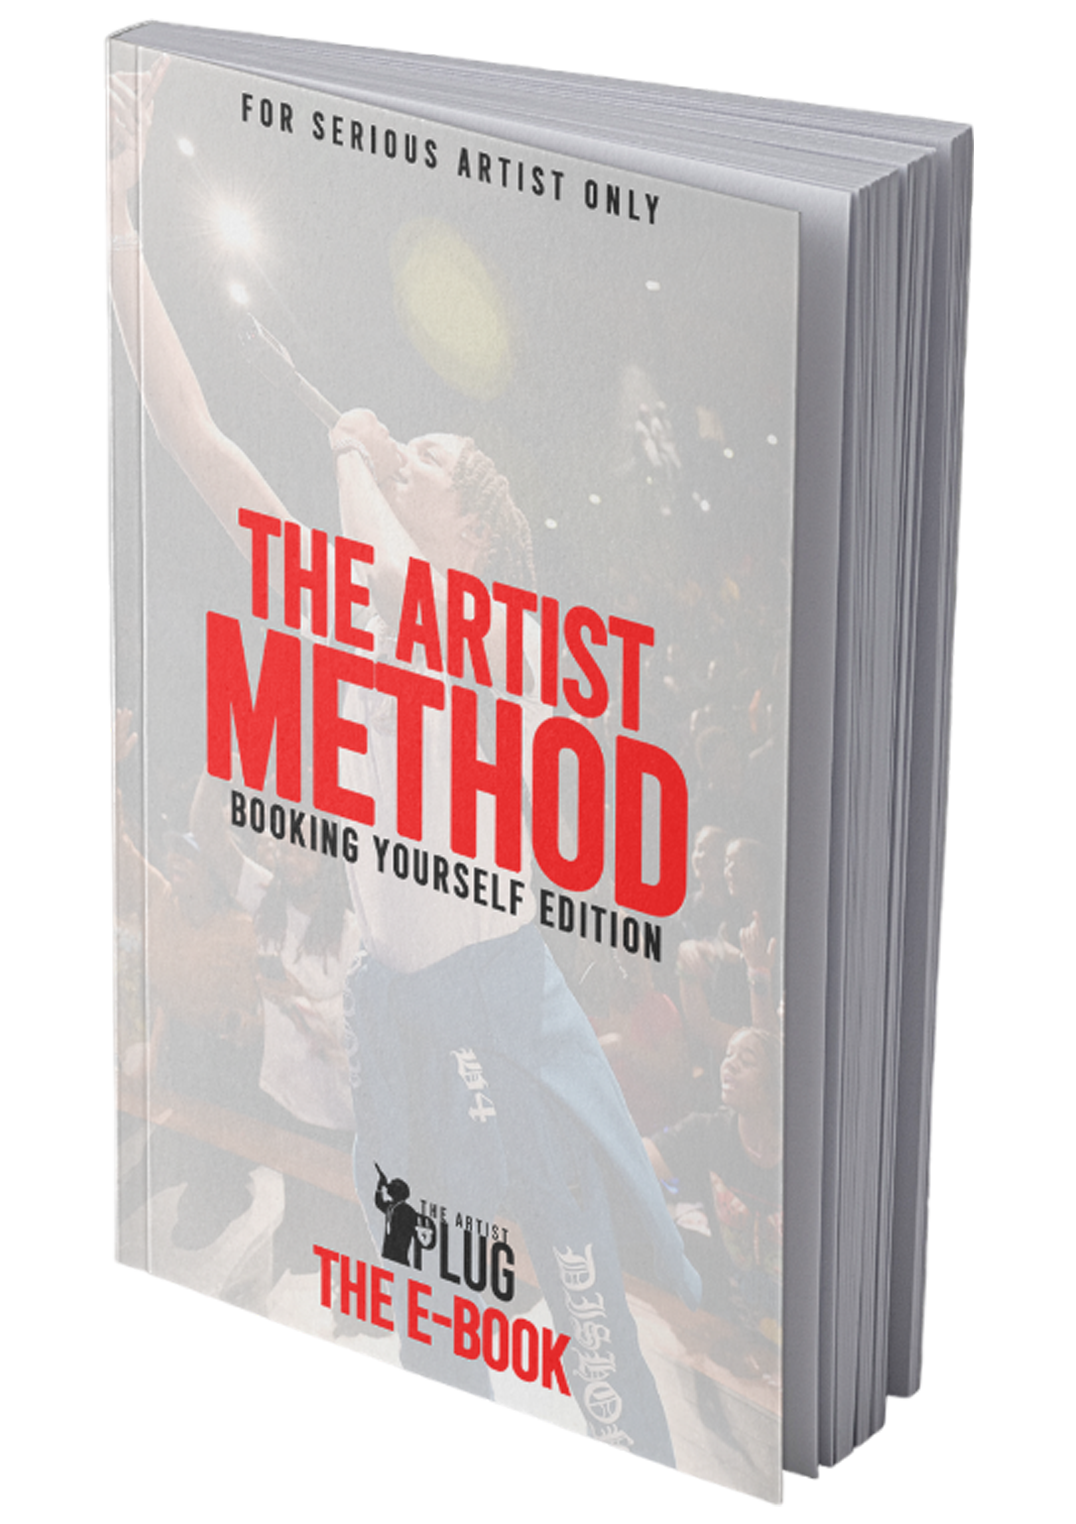 E-Book : The New Artist Marketing and Promotion Blueprint 2.0 (The Artist Method)